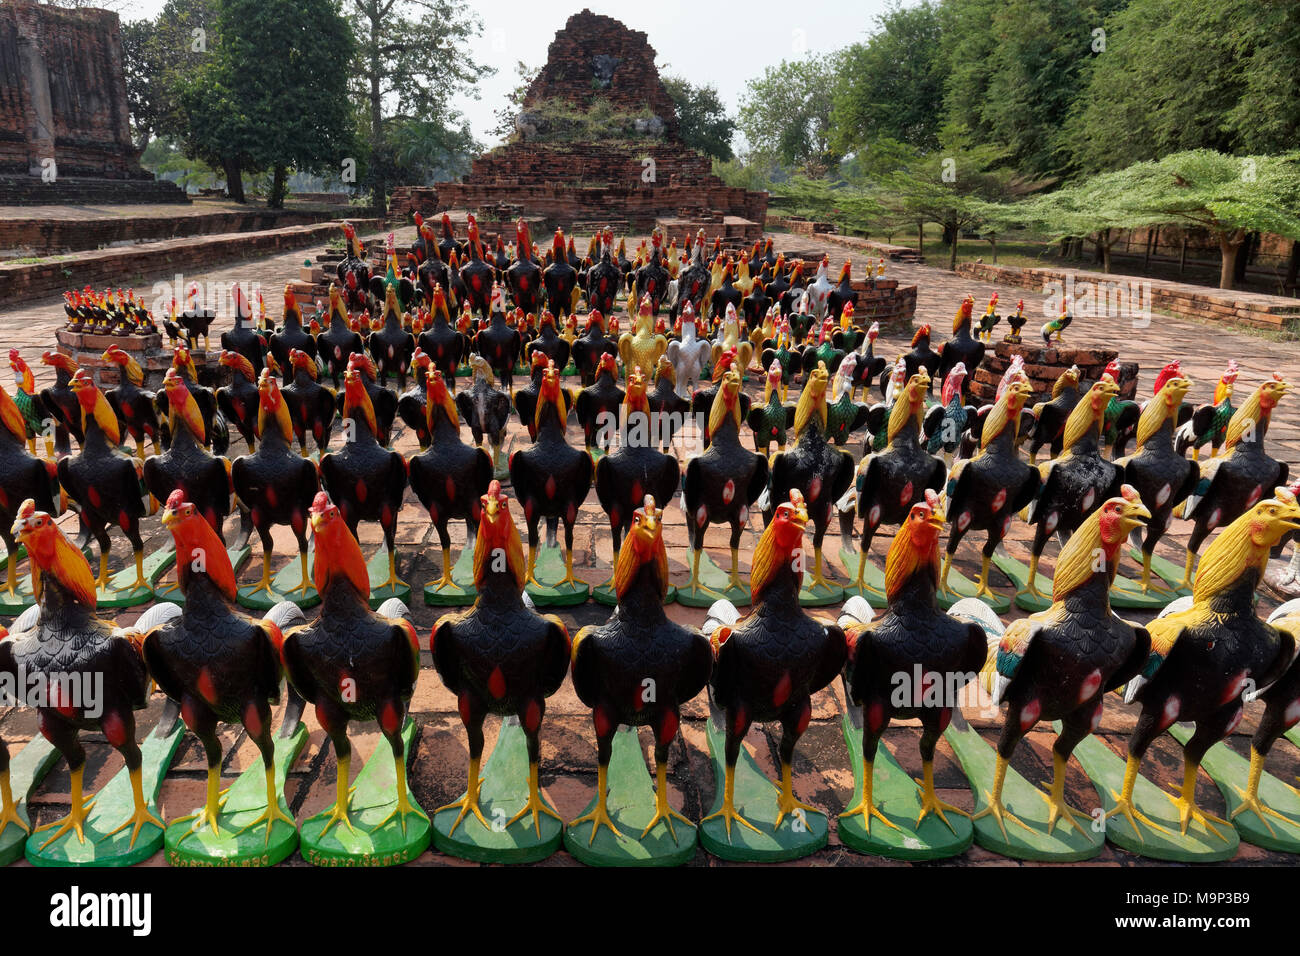 Rooster figures lined up in front of a Buddhist temple, souvenirs, Wat Thammikarat, Ayutthaya History Park, Ayutthaya, Thailand Stock Photo